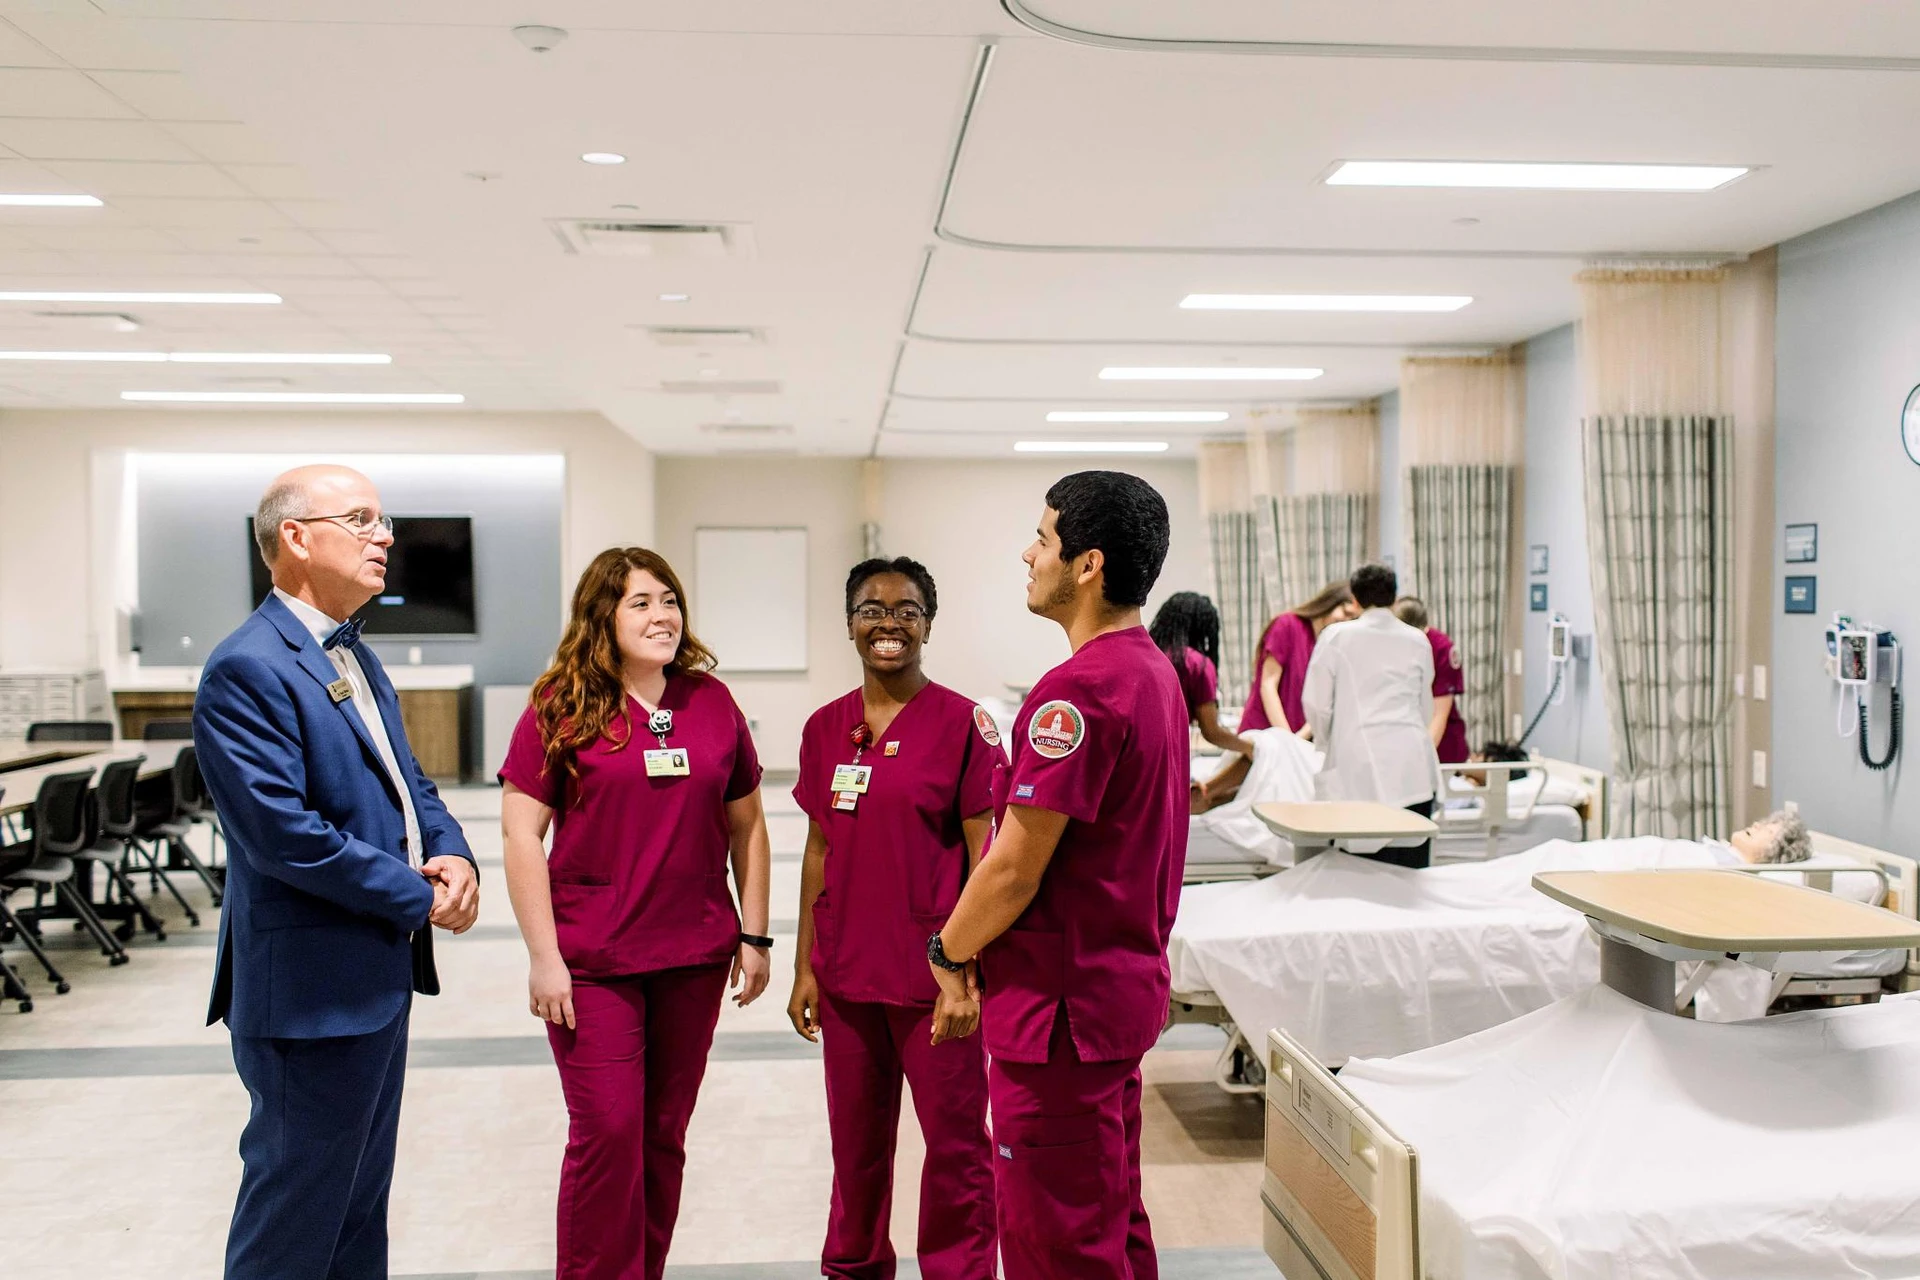 Dr. Shaw, the university president, stand in his blue suit as he speaks with 3 nursing students in scrubs. 